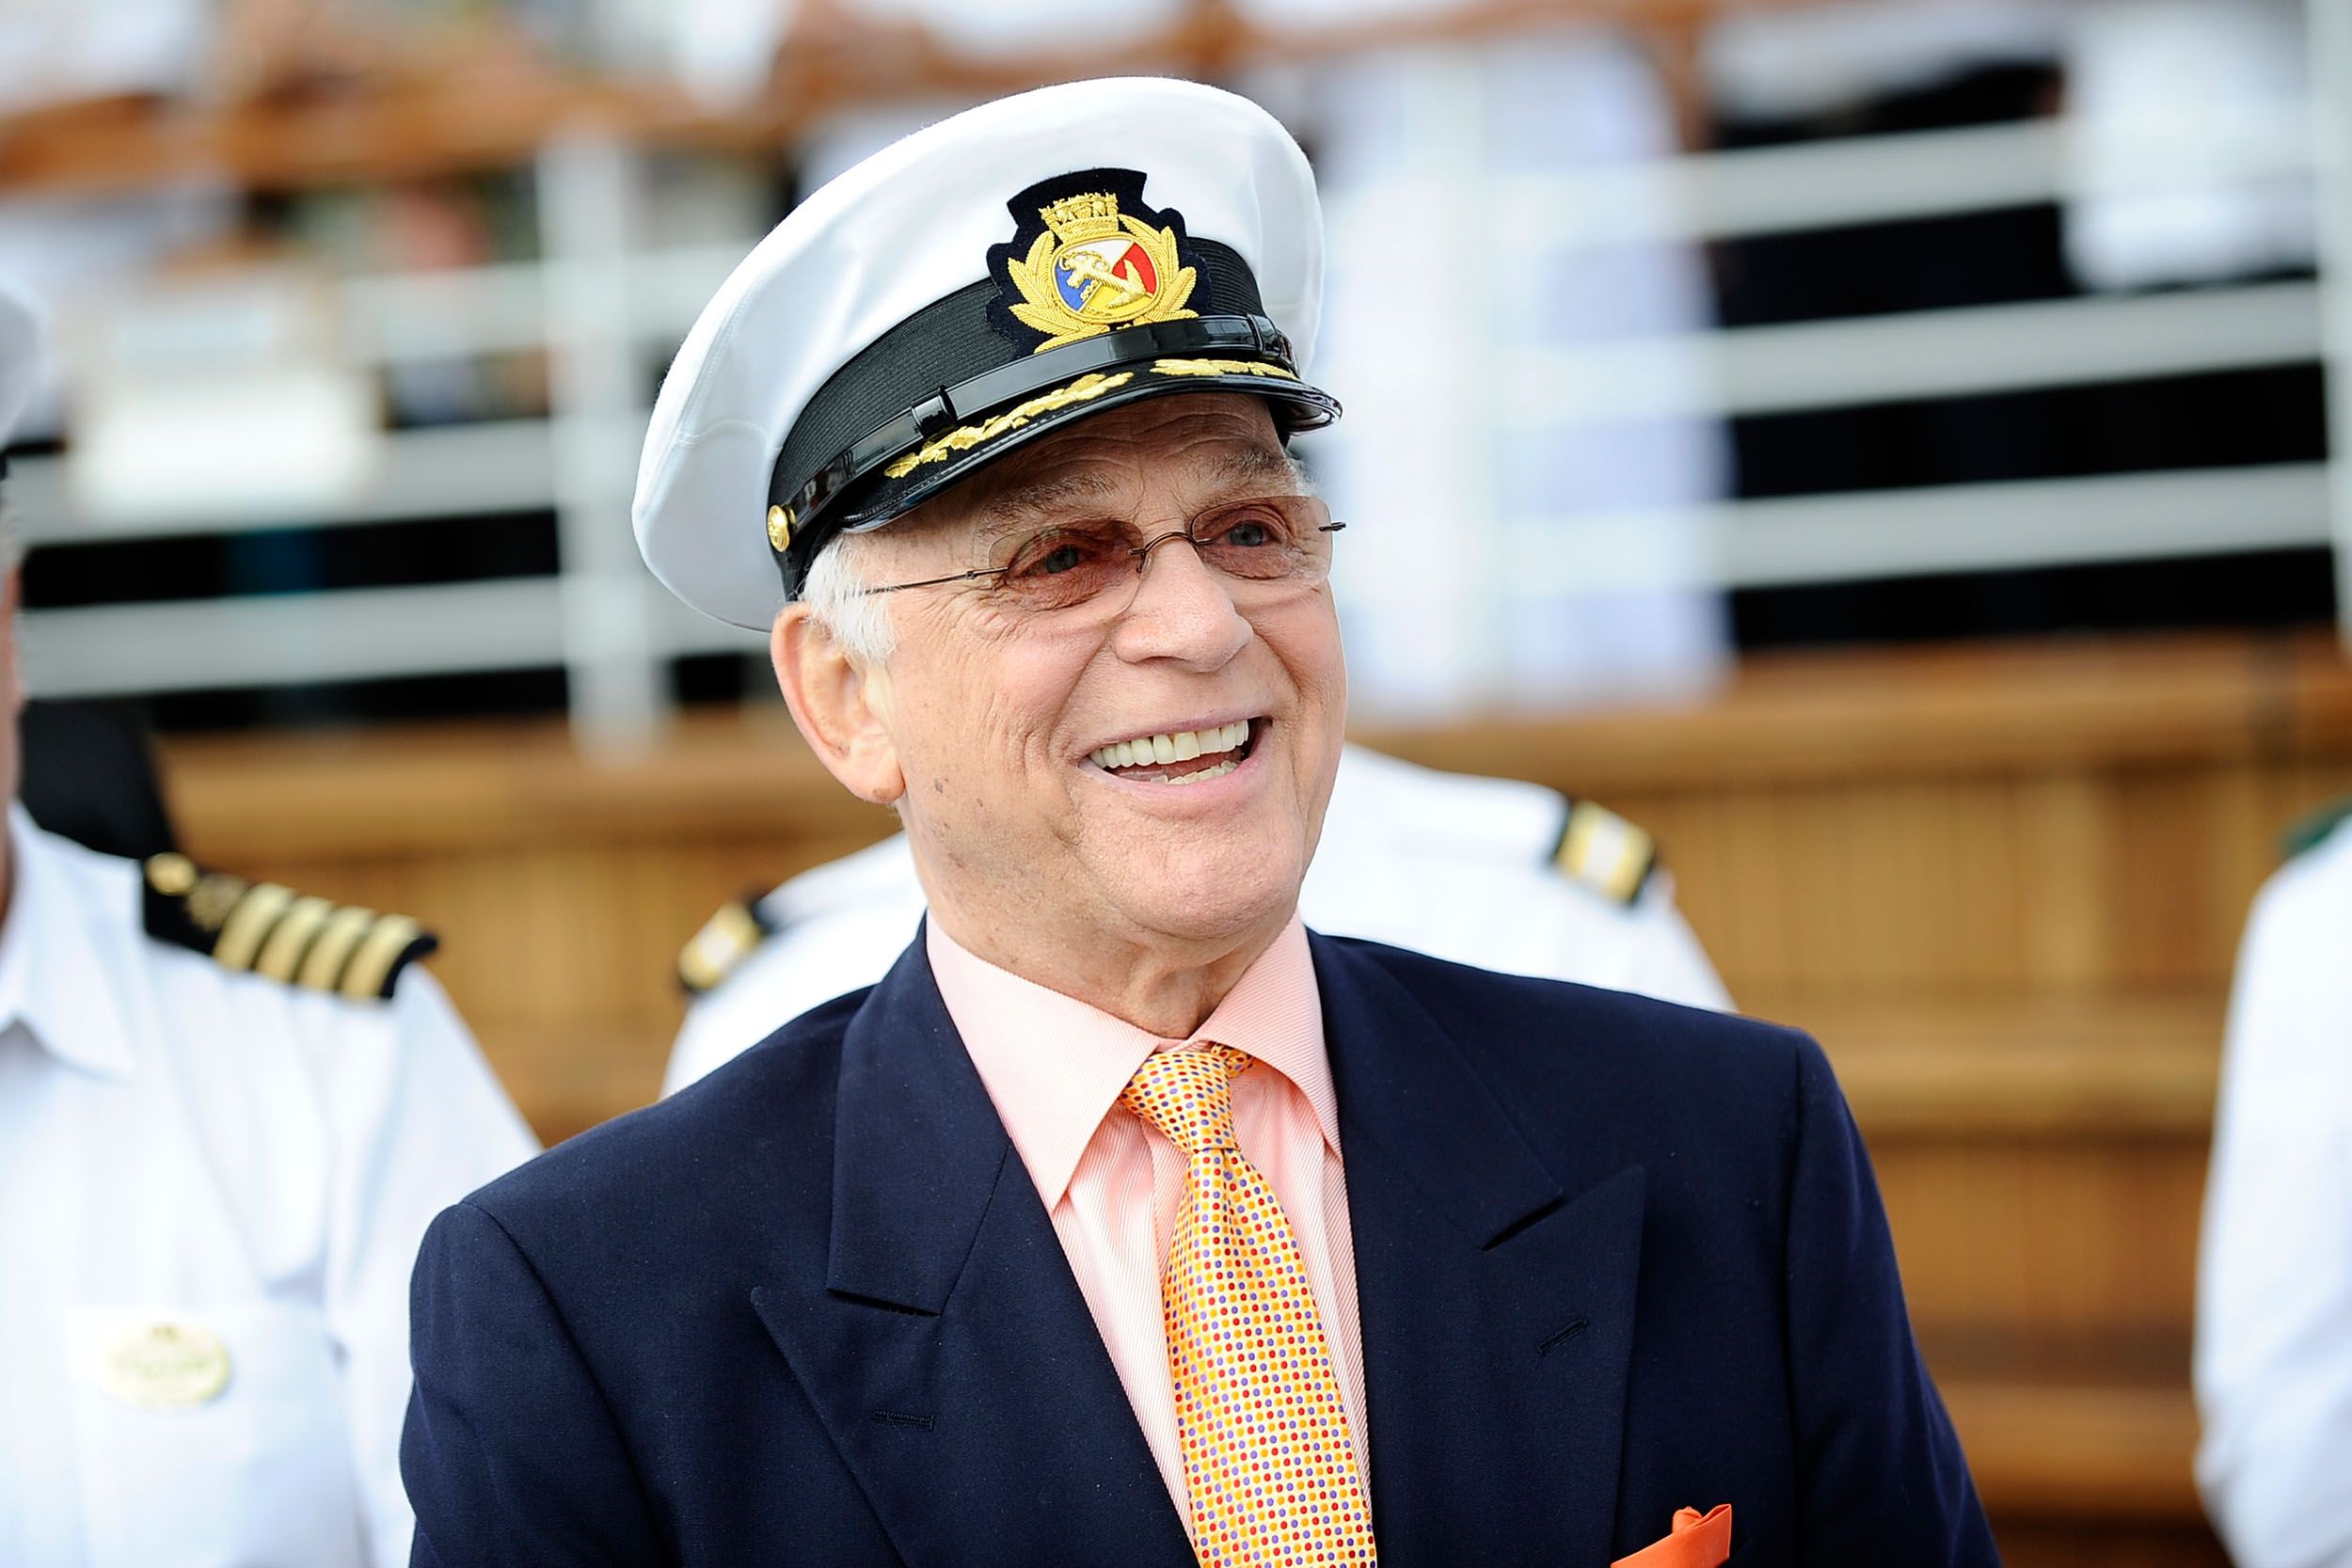 Gavin MacLeod, Captain Stubing From "The Love Boat", celebrates his 80th Birthday on board the Golden Princess in 2011 | Source: Getty Images